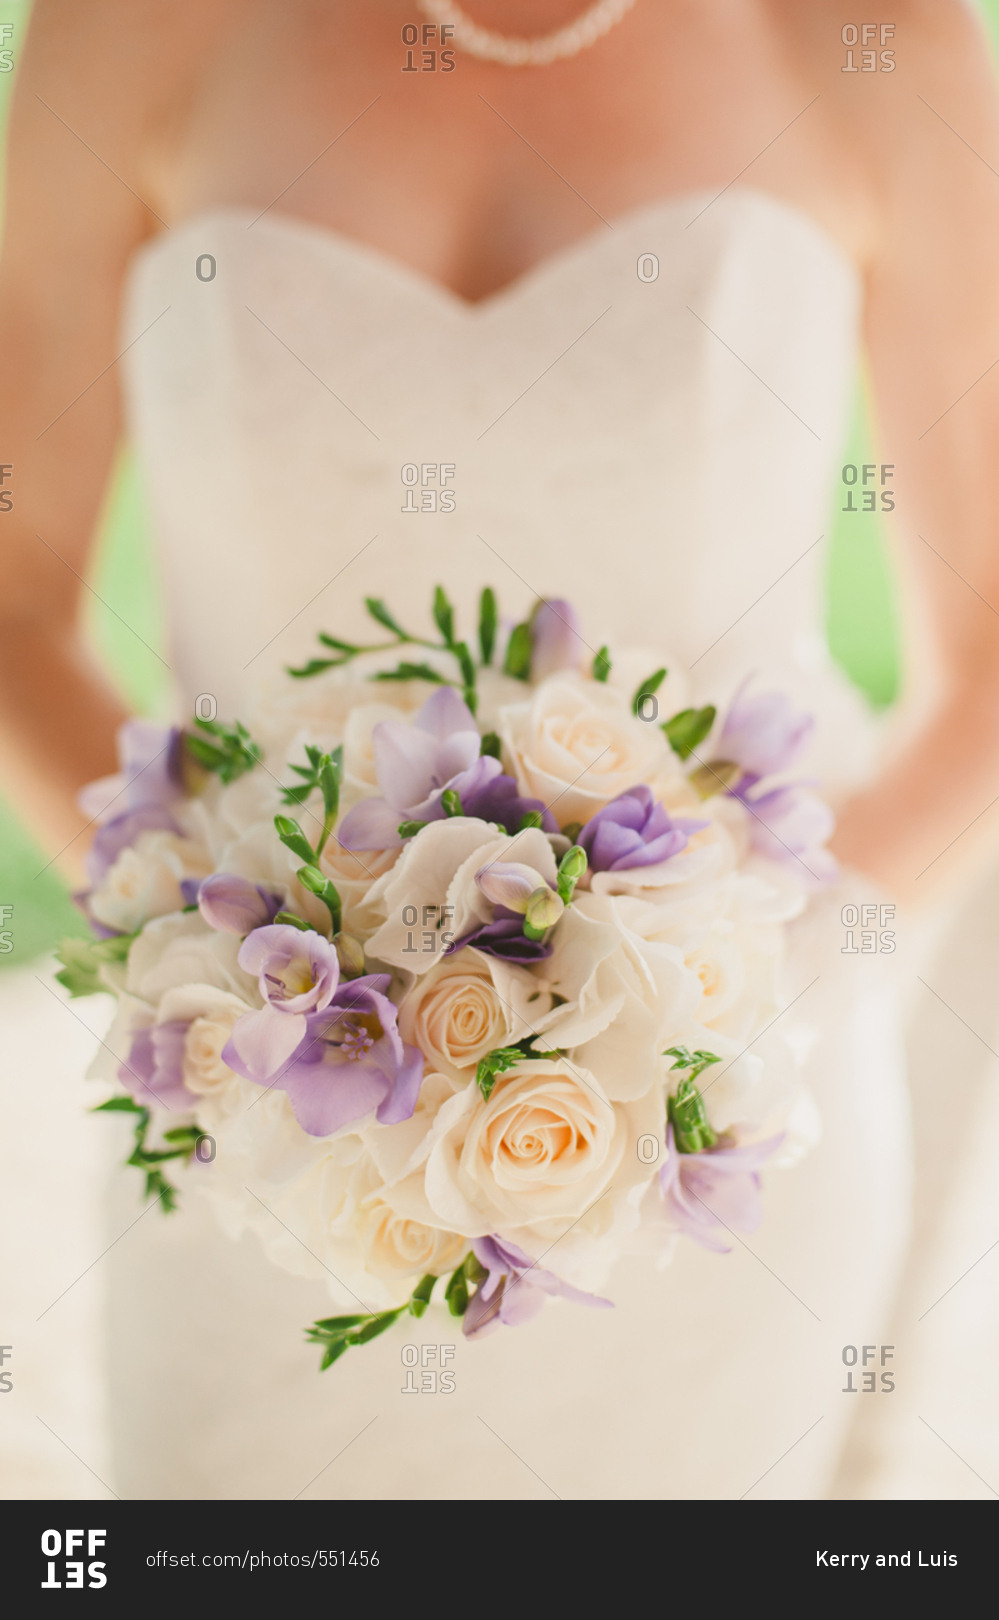 Bride holding bouquet of white roses and purple flowers